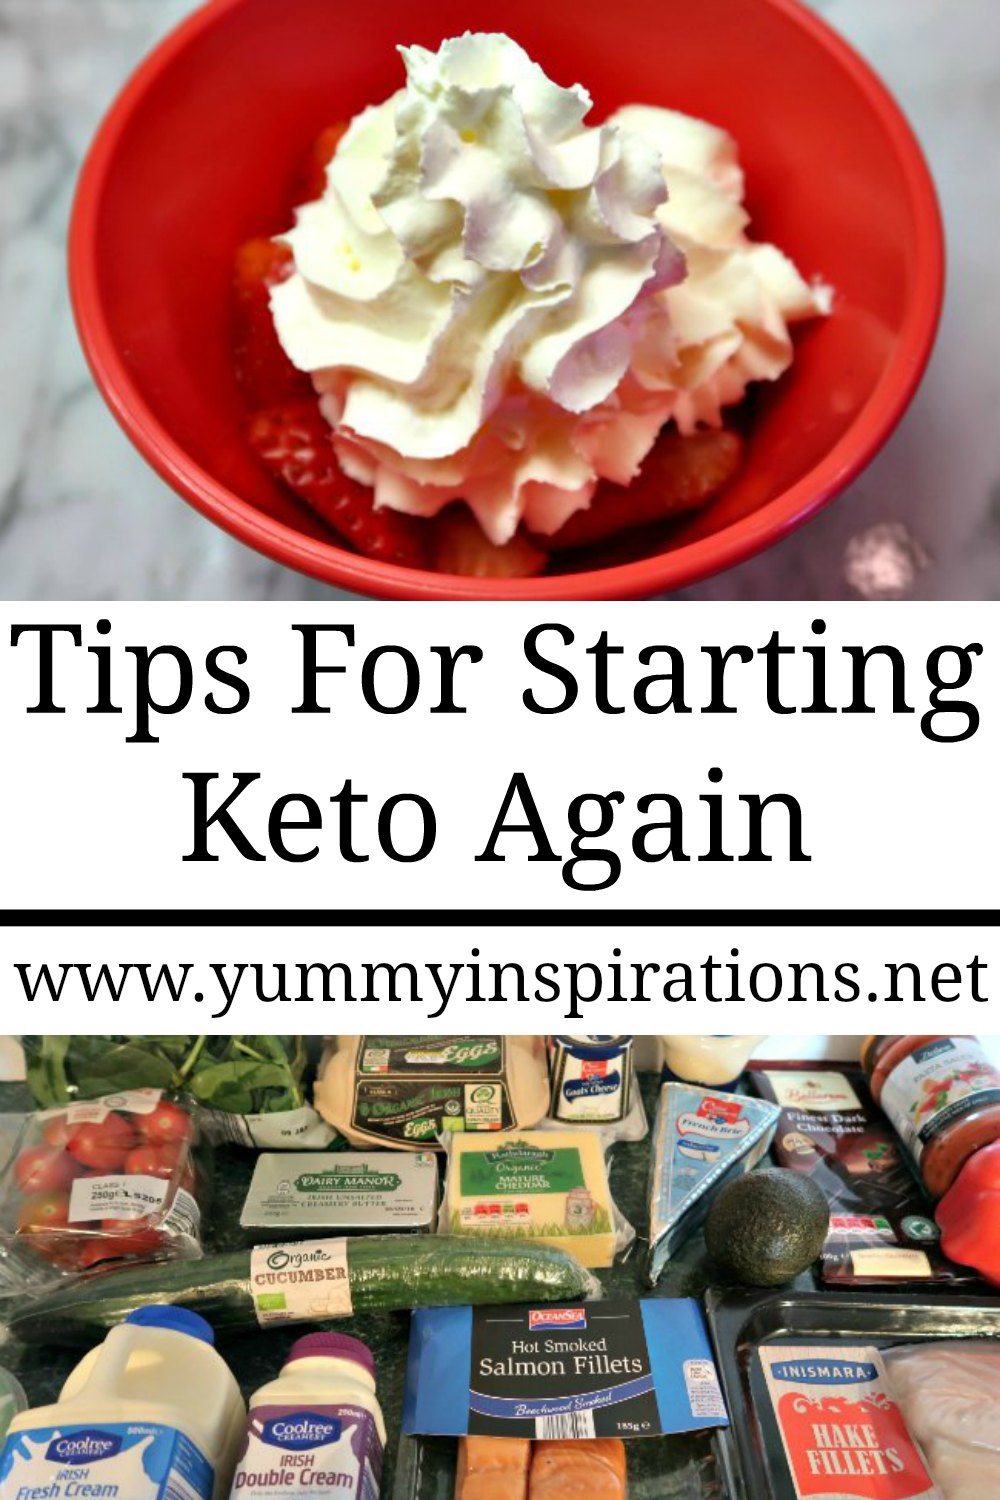 Starting Keto Again – How to start the keto diet over again – Plan and Tips for getting back on track with the Low Carb, Ketogenic Diet Lifestyle, getting back into Ketosis and easy meal ideas.